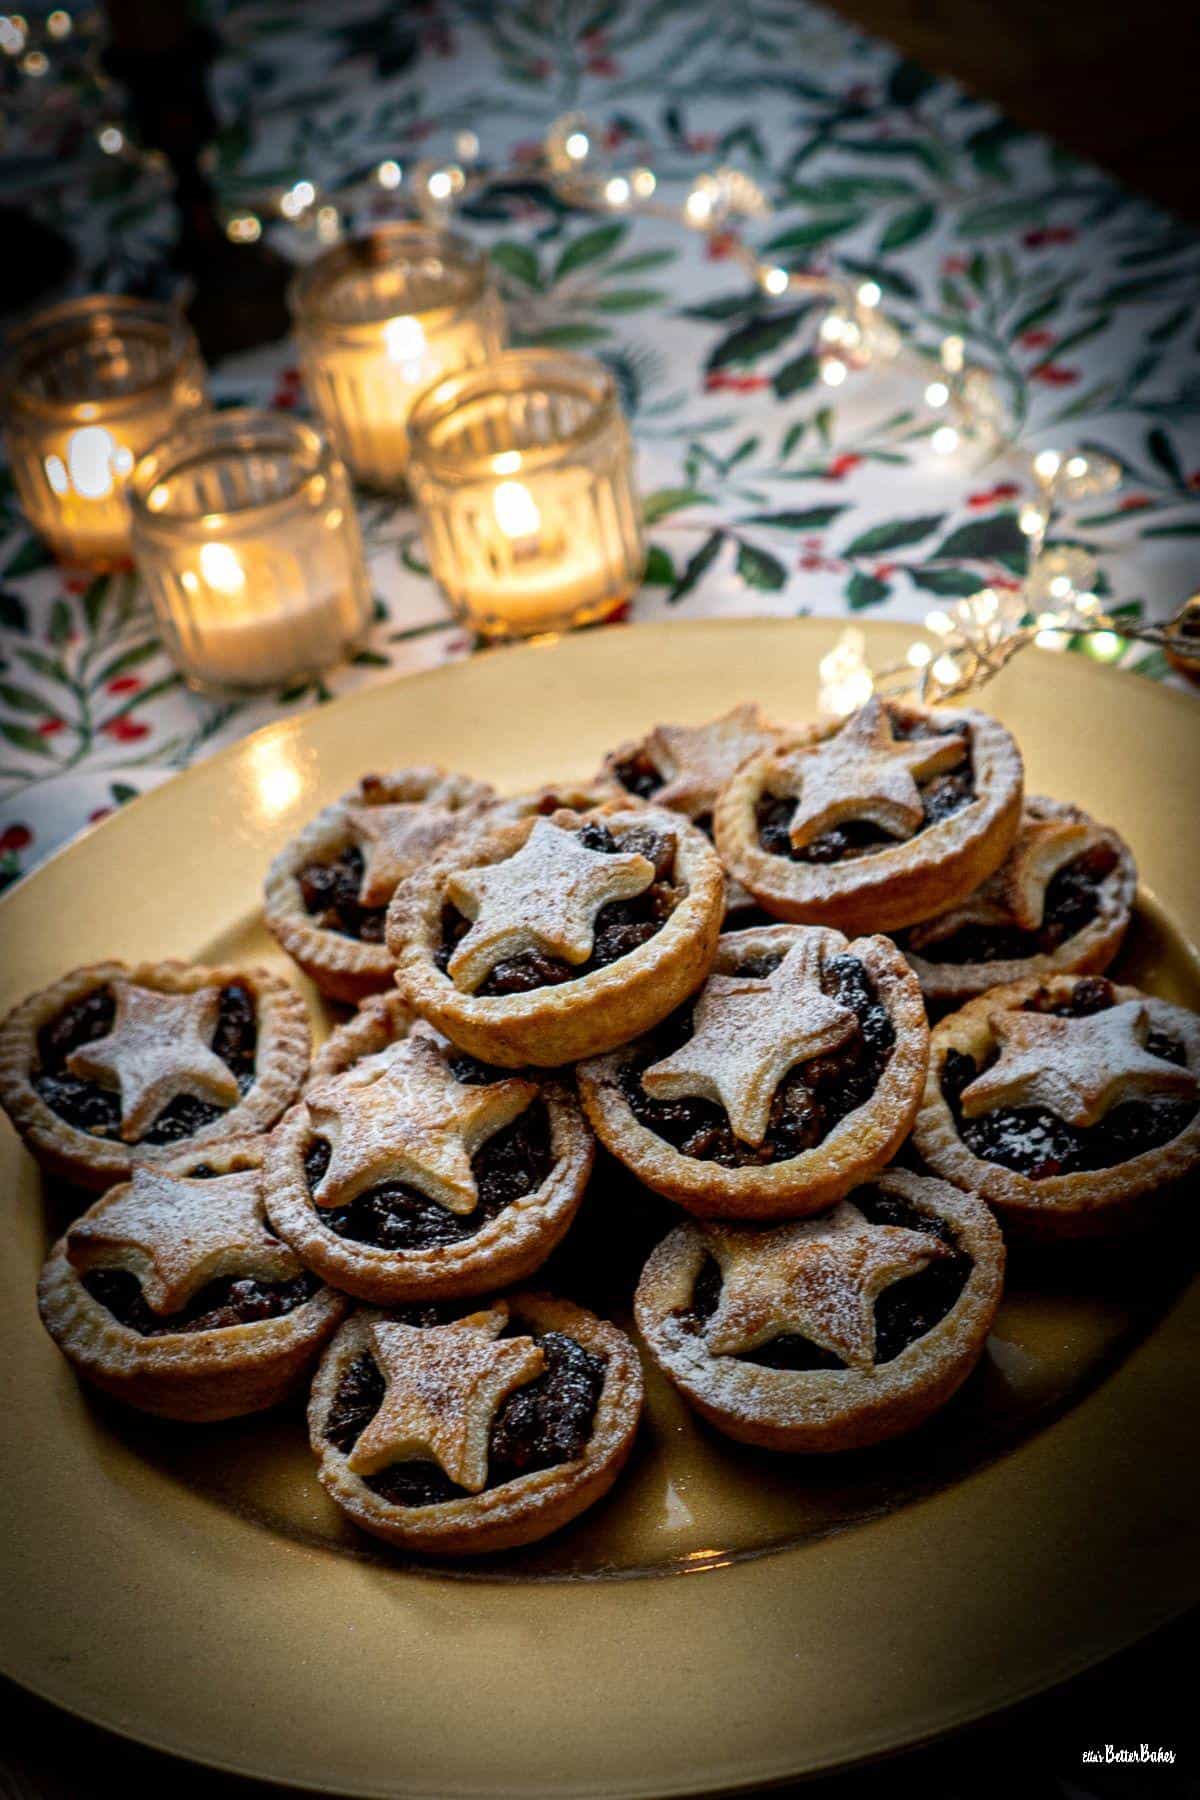 portrait size picture of plate of mince pies on table runner